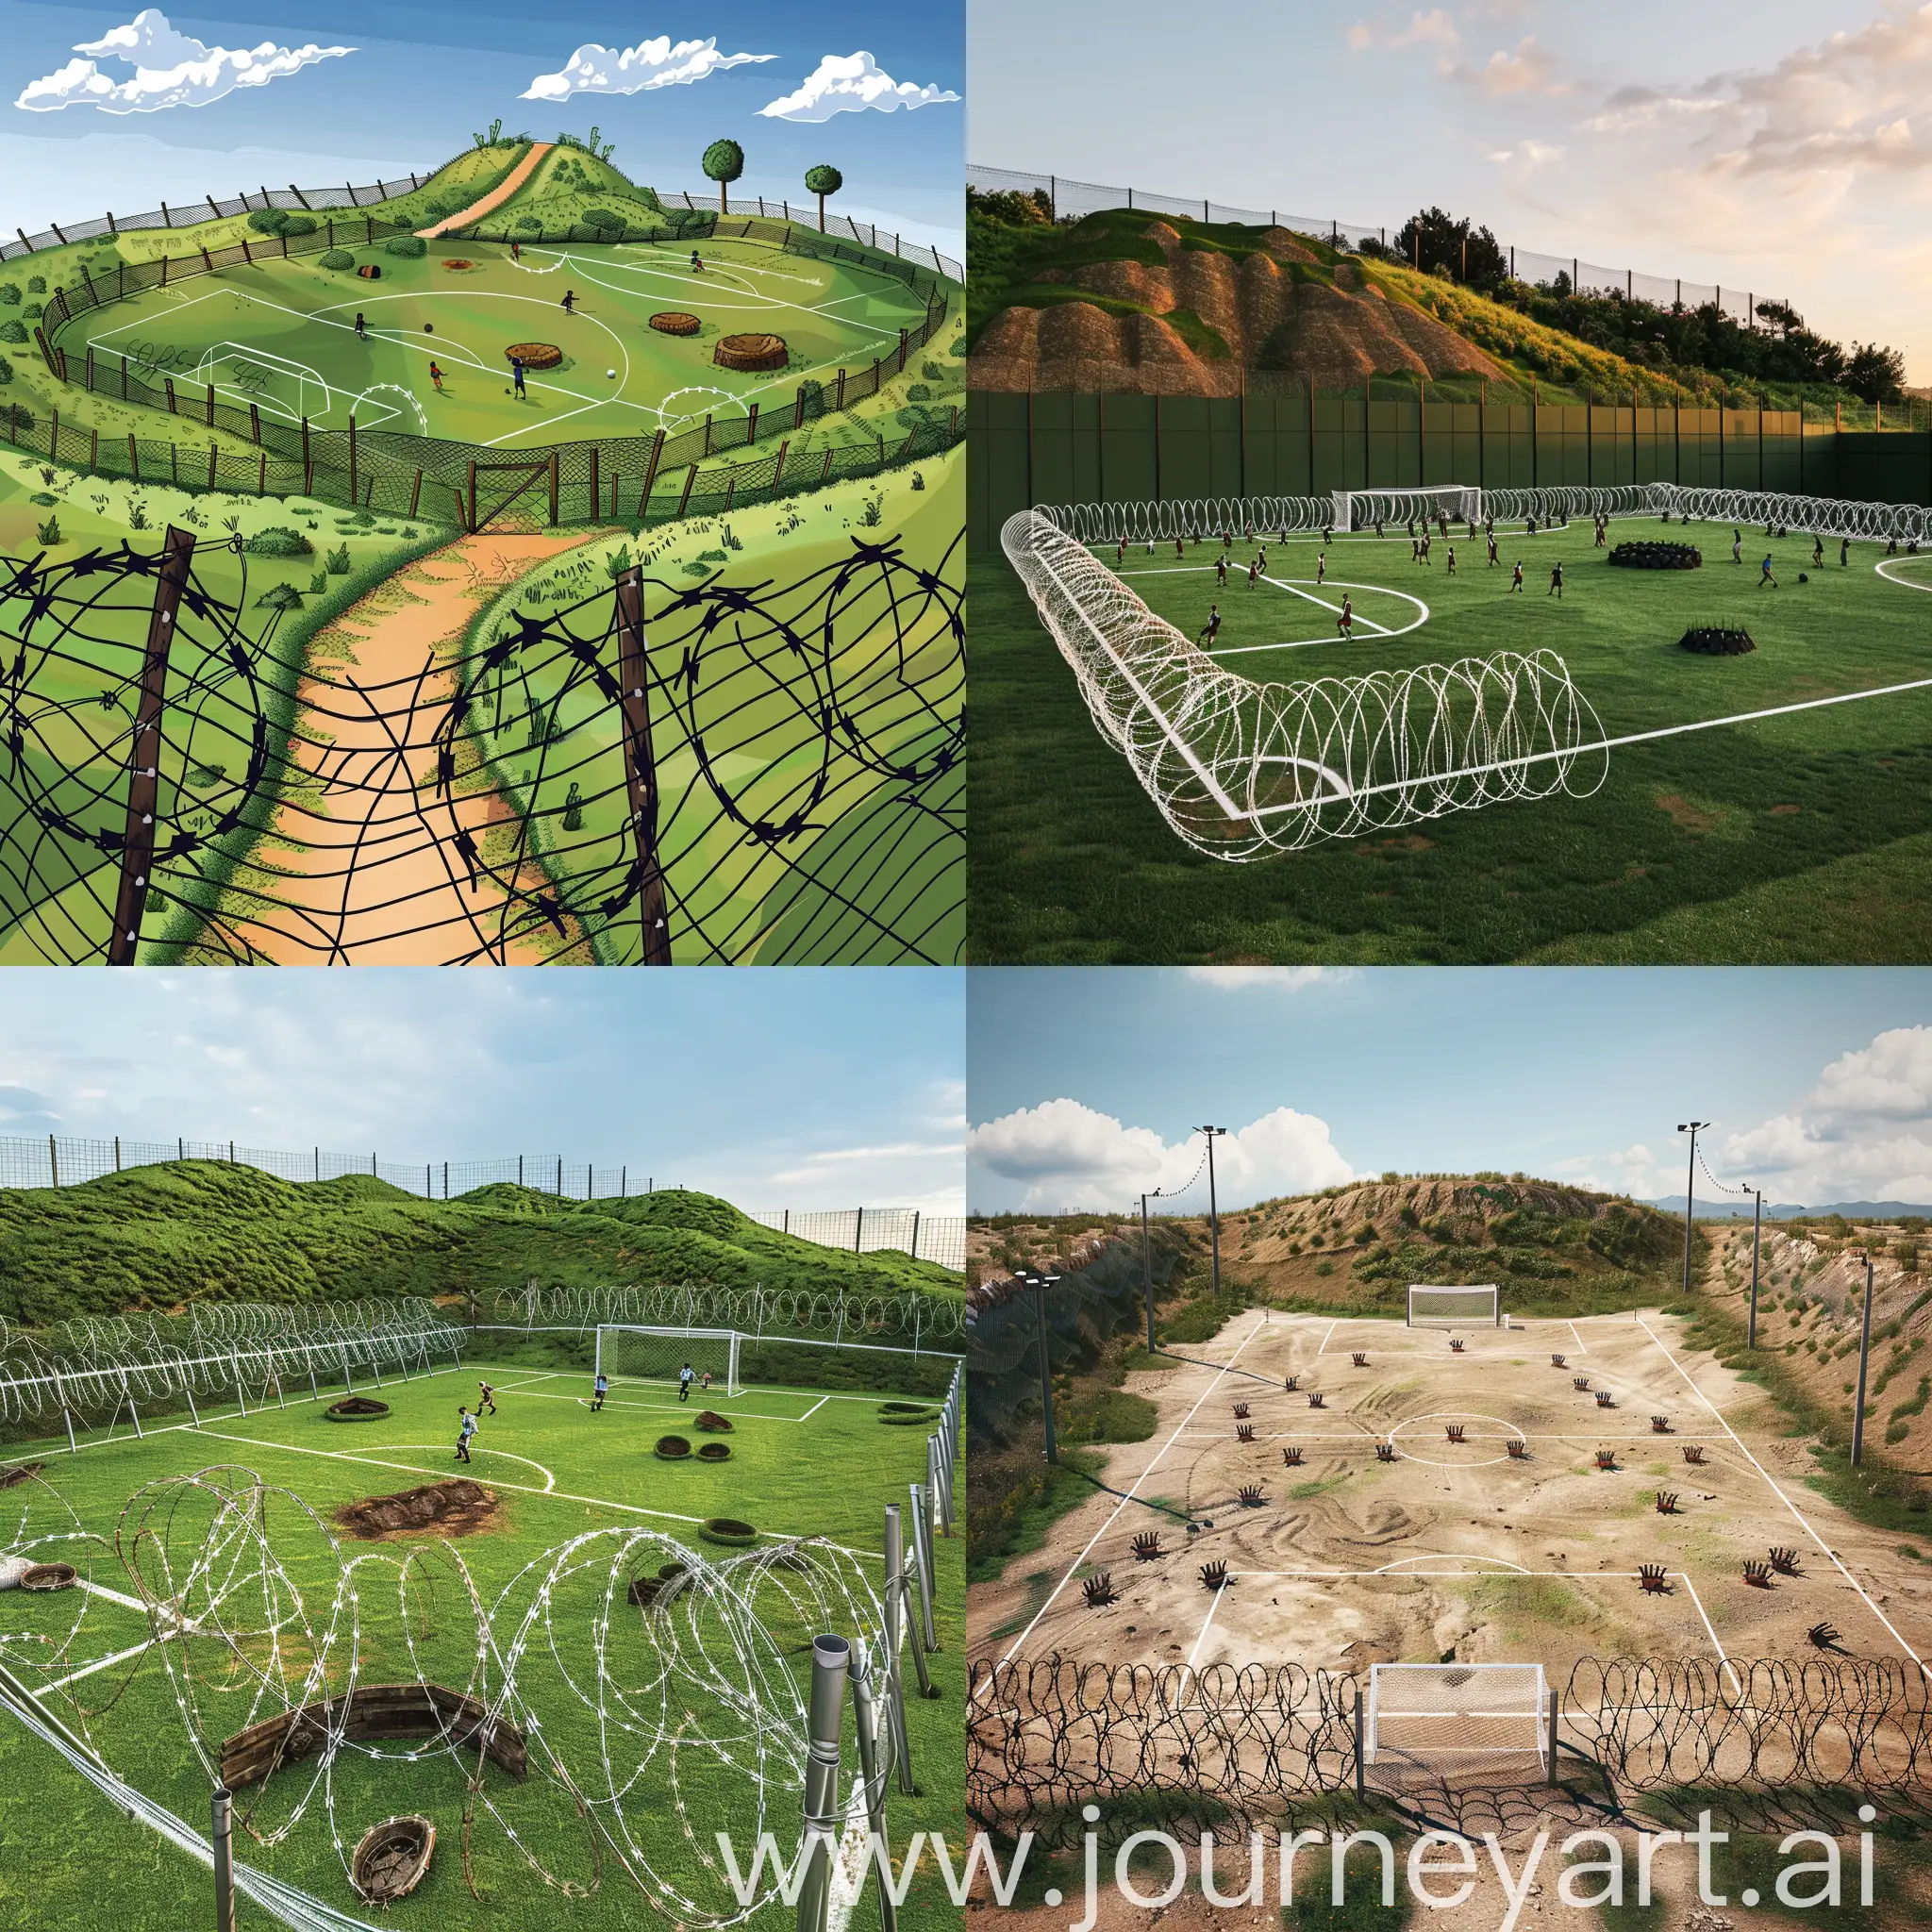 Challenging-Soccer-Field-Obstacle-Course-with-Hill-Barbed-Wire-Pit-and-Trap